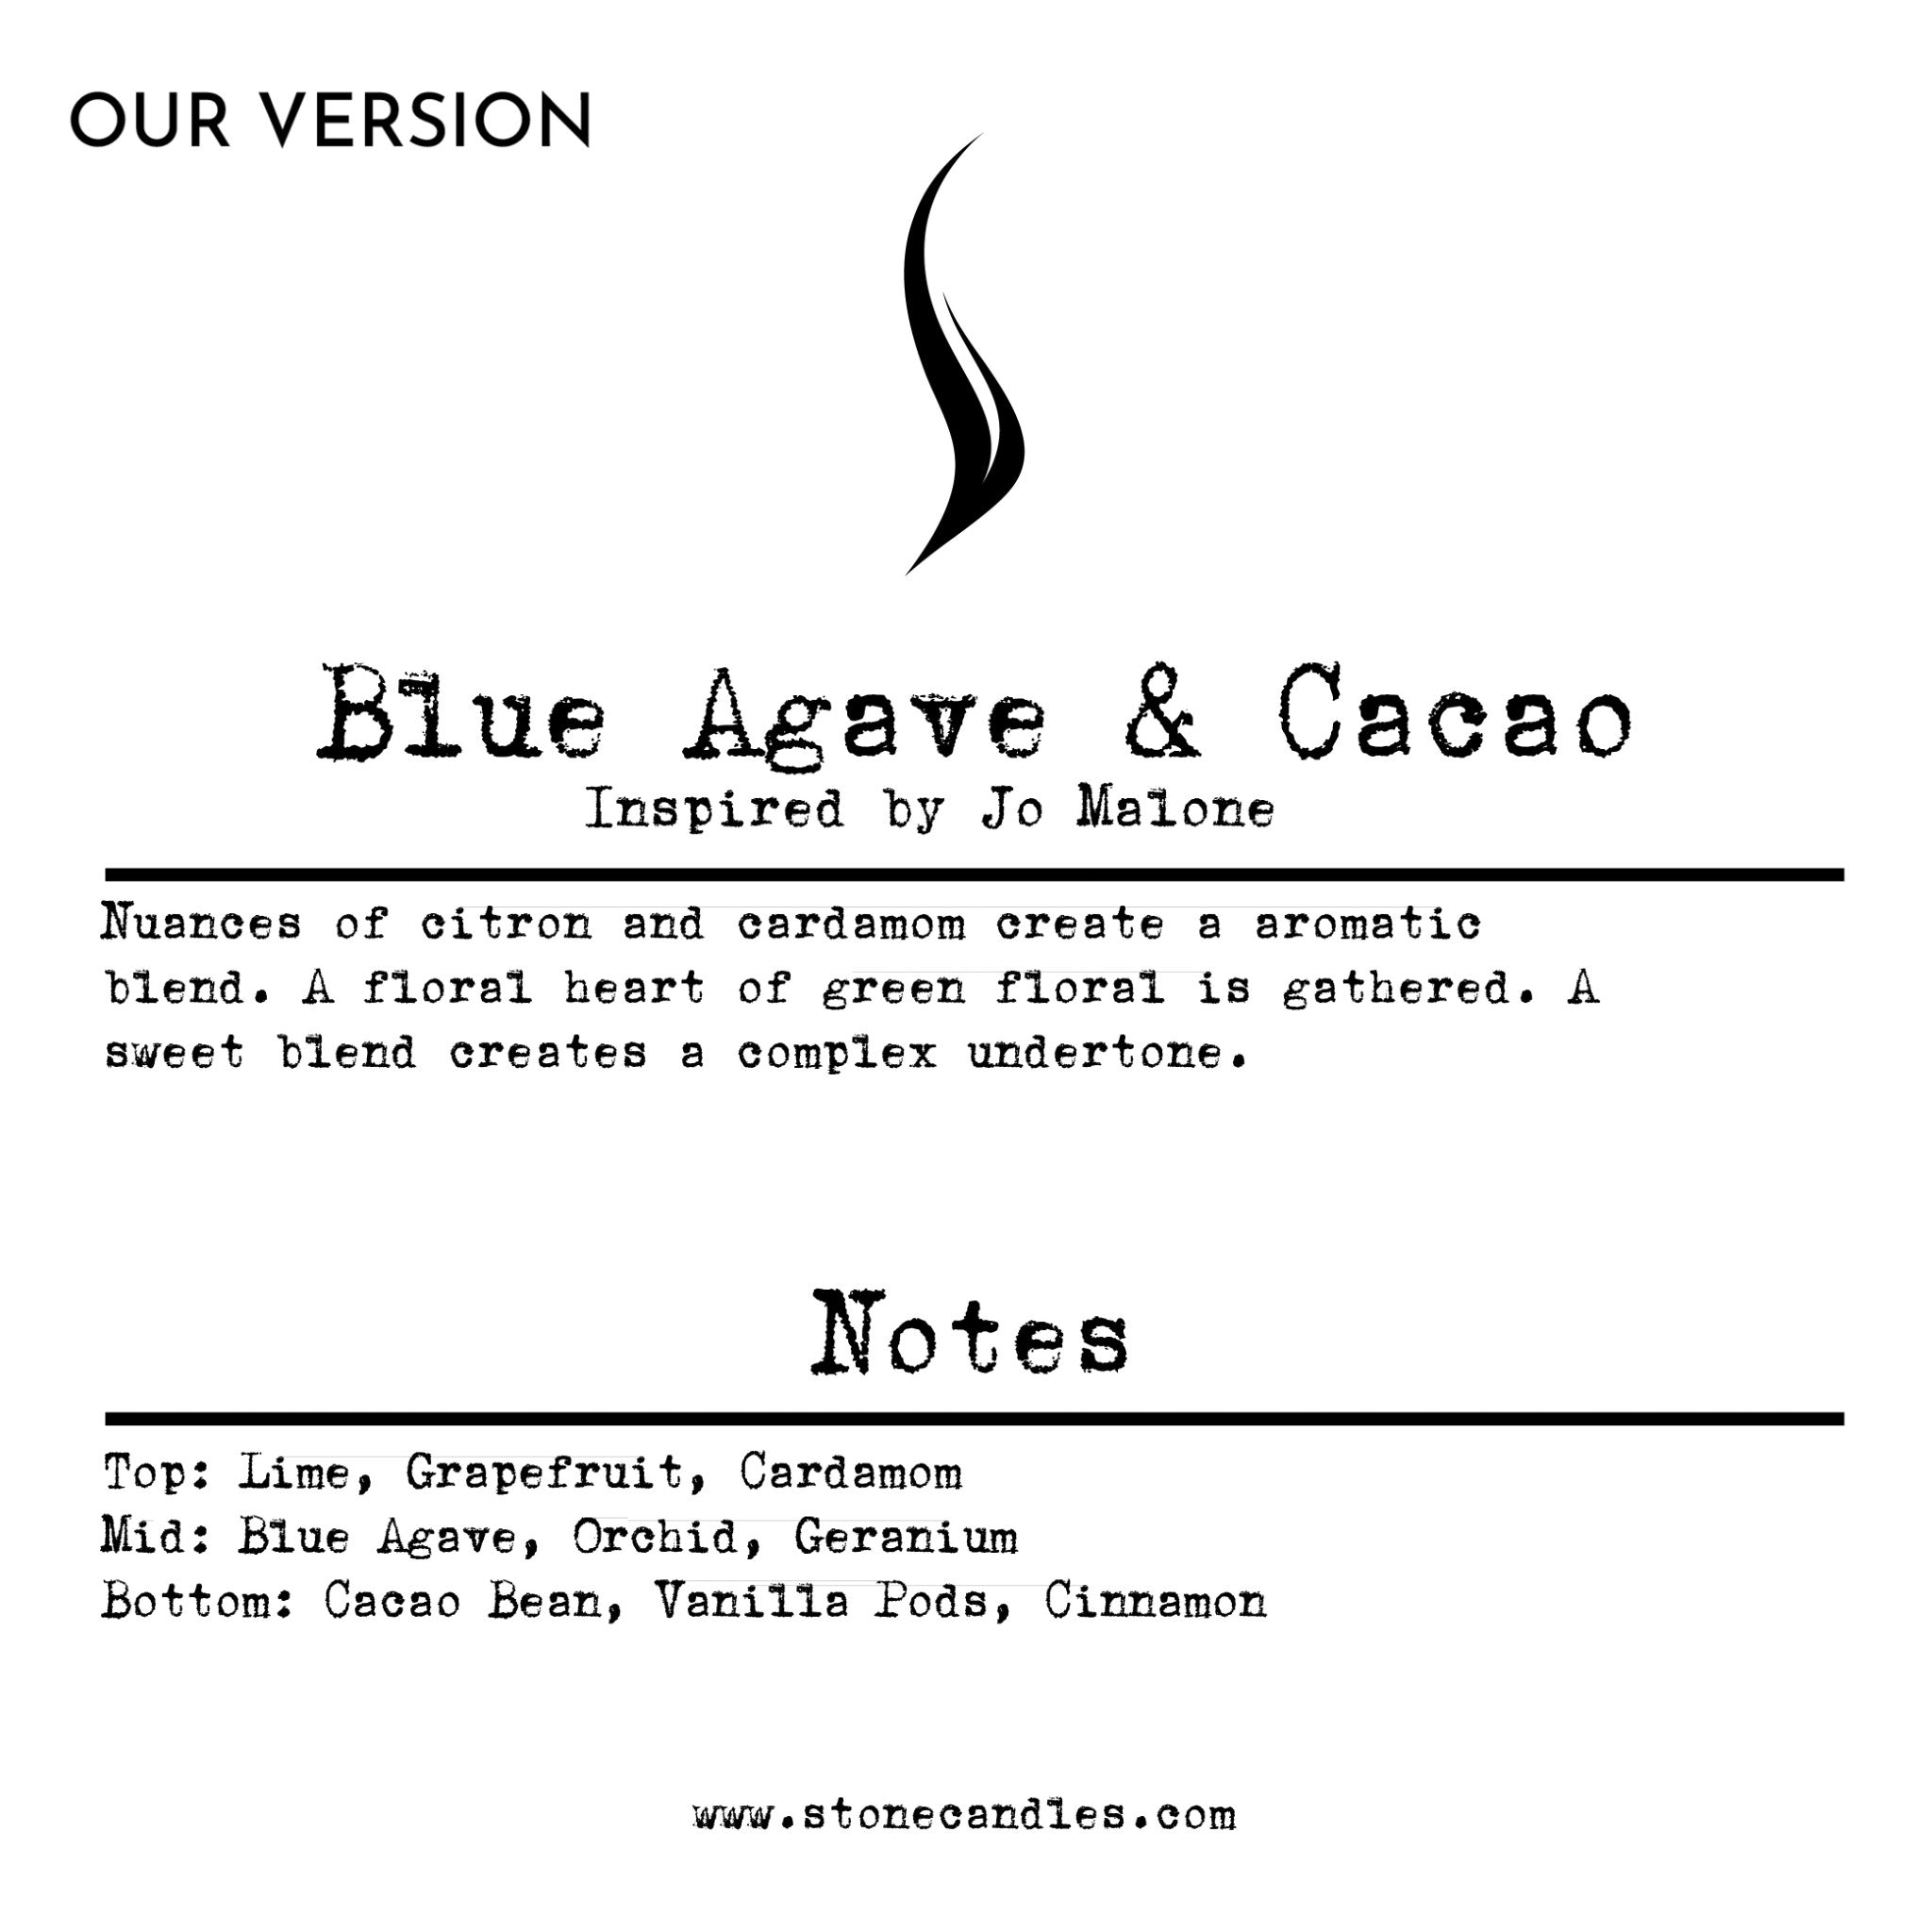 Blue Agave & Cacao (our version) Sample Scent Strip